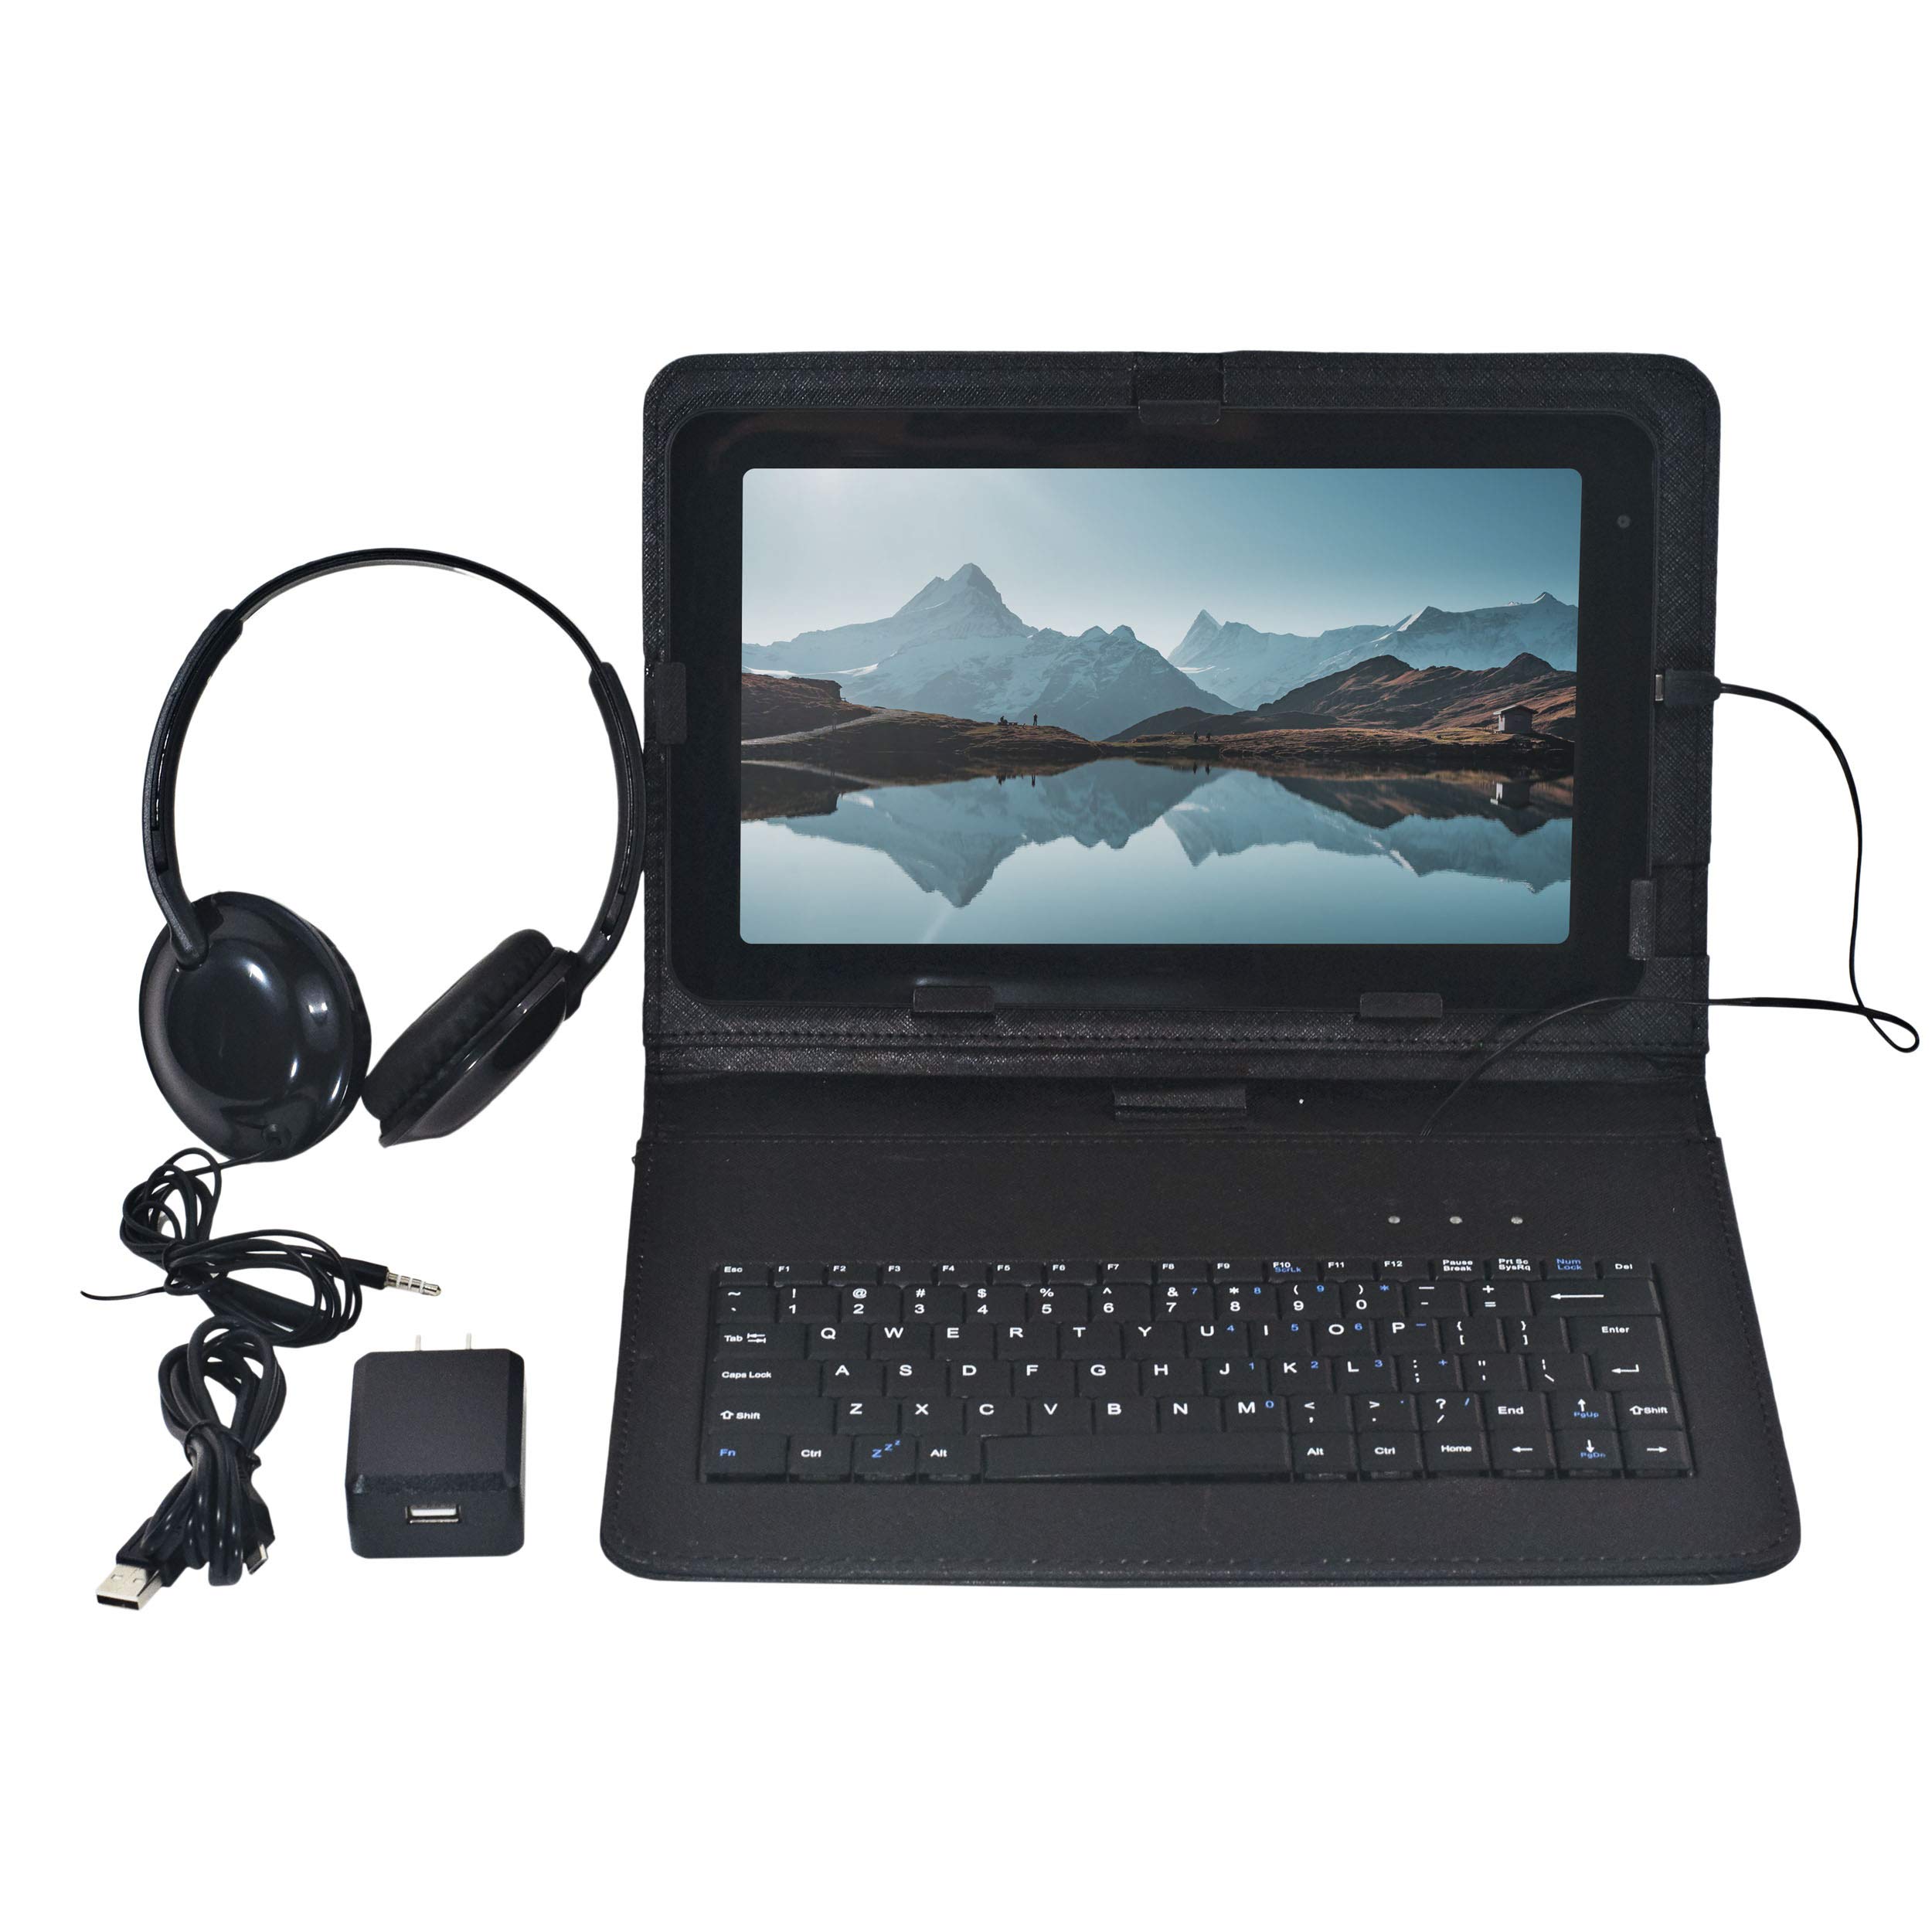 Craig CMP840 BUN-BK-HD Quad Core 10.1 in. Tablet with Keyboard Case and Headphones in Black